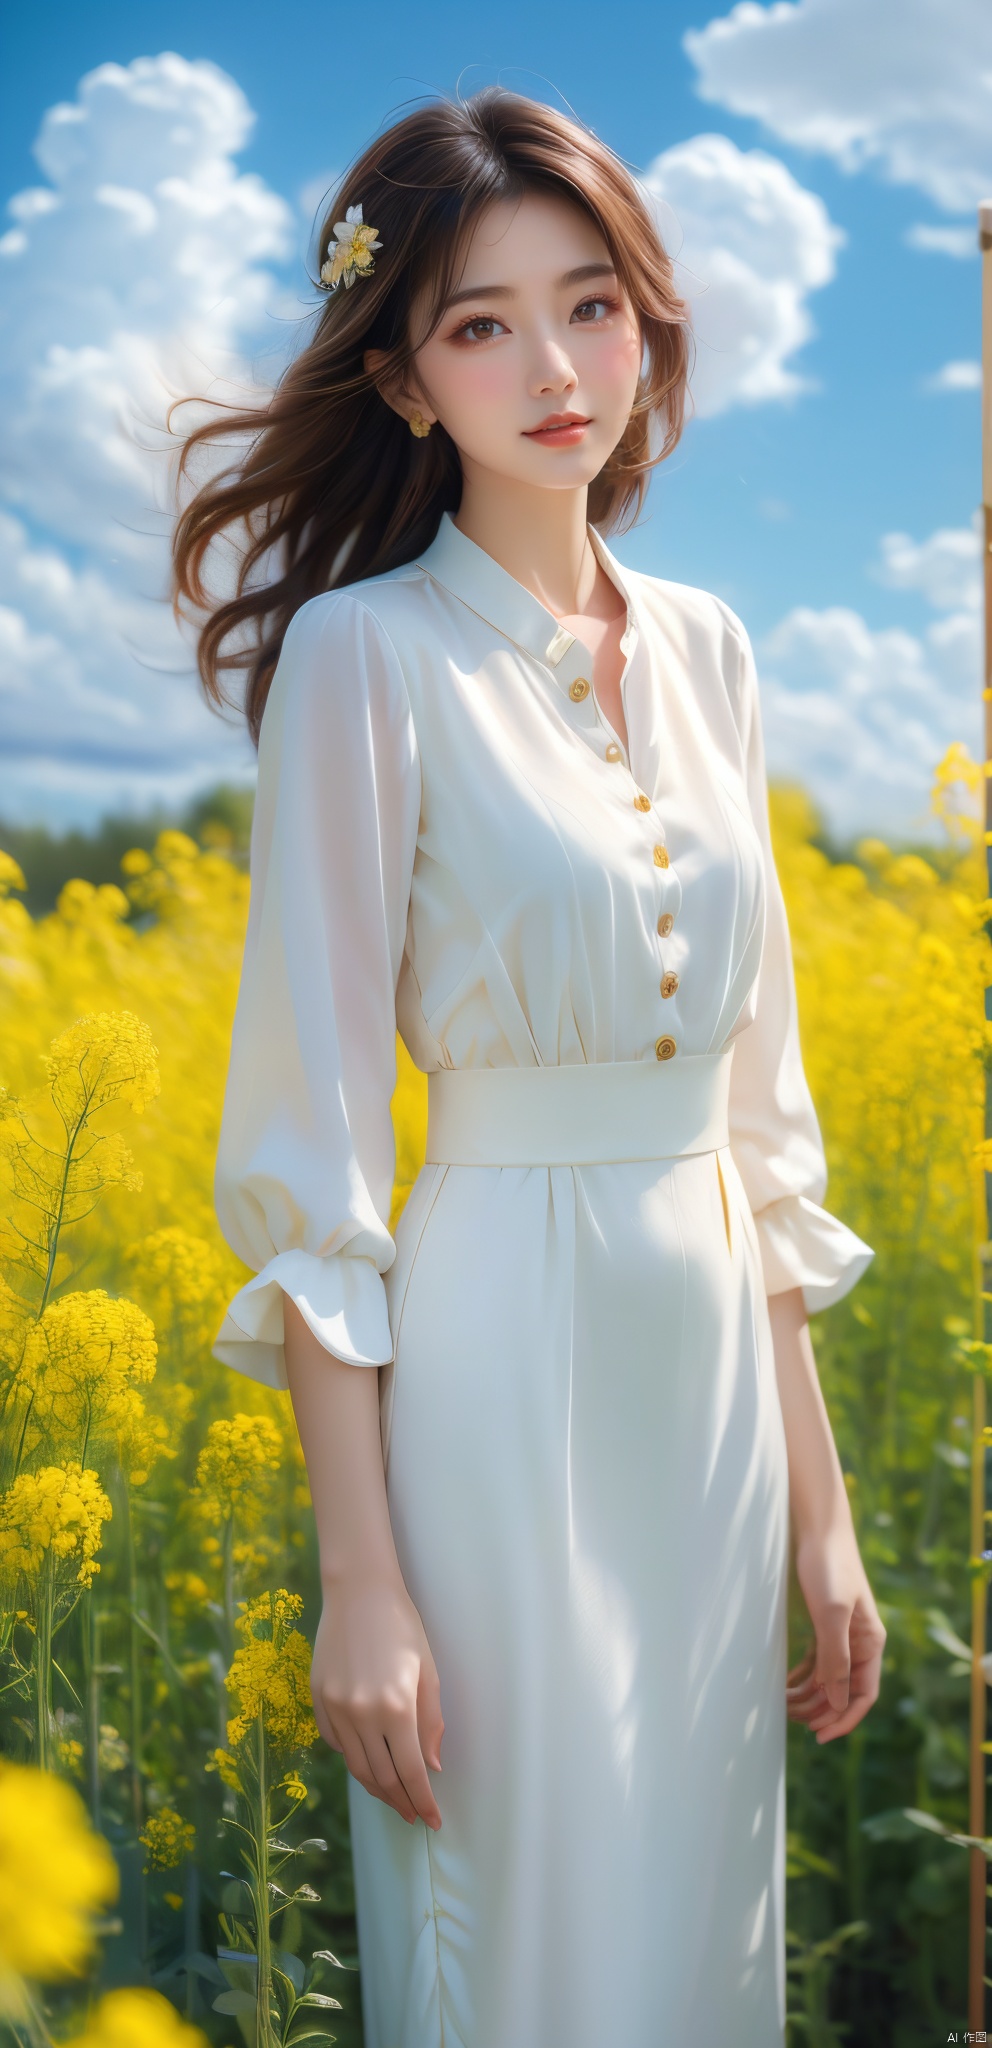  A elegant woman in a dark suit with golden short hair, standing in a field of blooming rapeseed flowers against a backdrop of blue sky and white clouds, gentle breeze blowing, causing her clothes corner and hair to flutter slightly, high quality full HD picture, art painting by famous artist., Light master, ((poakl)), (\meng ze\), xiqing